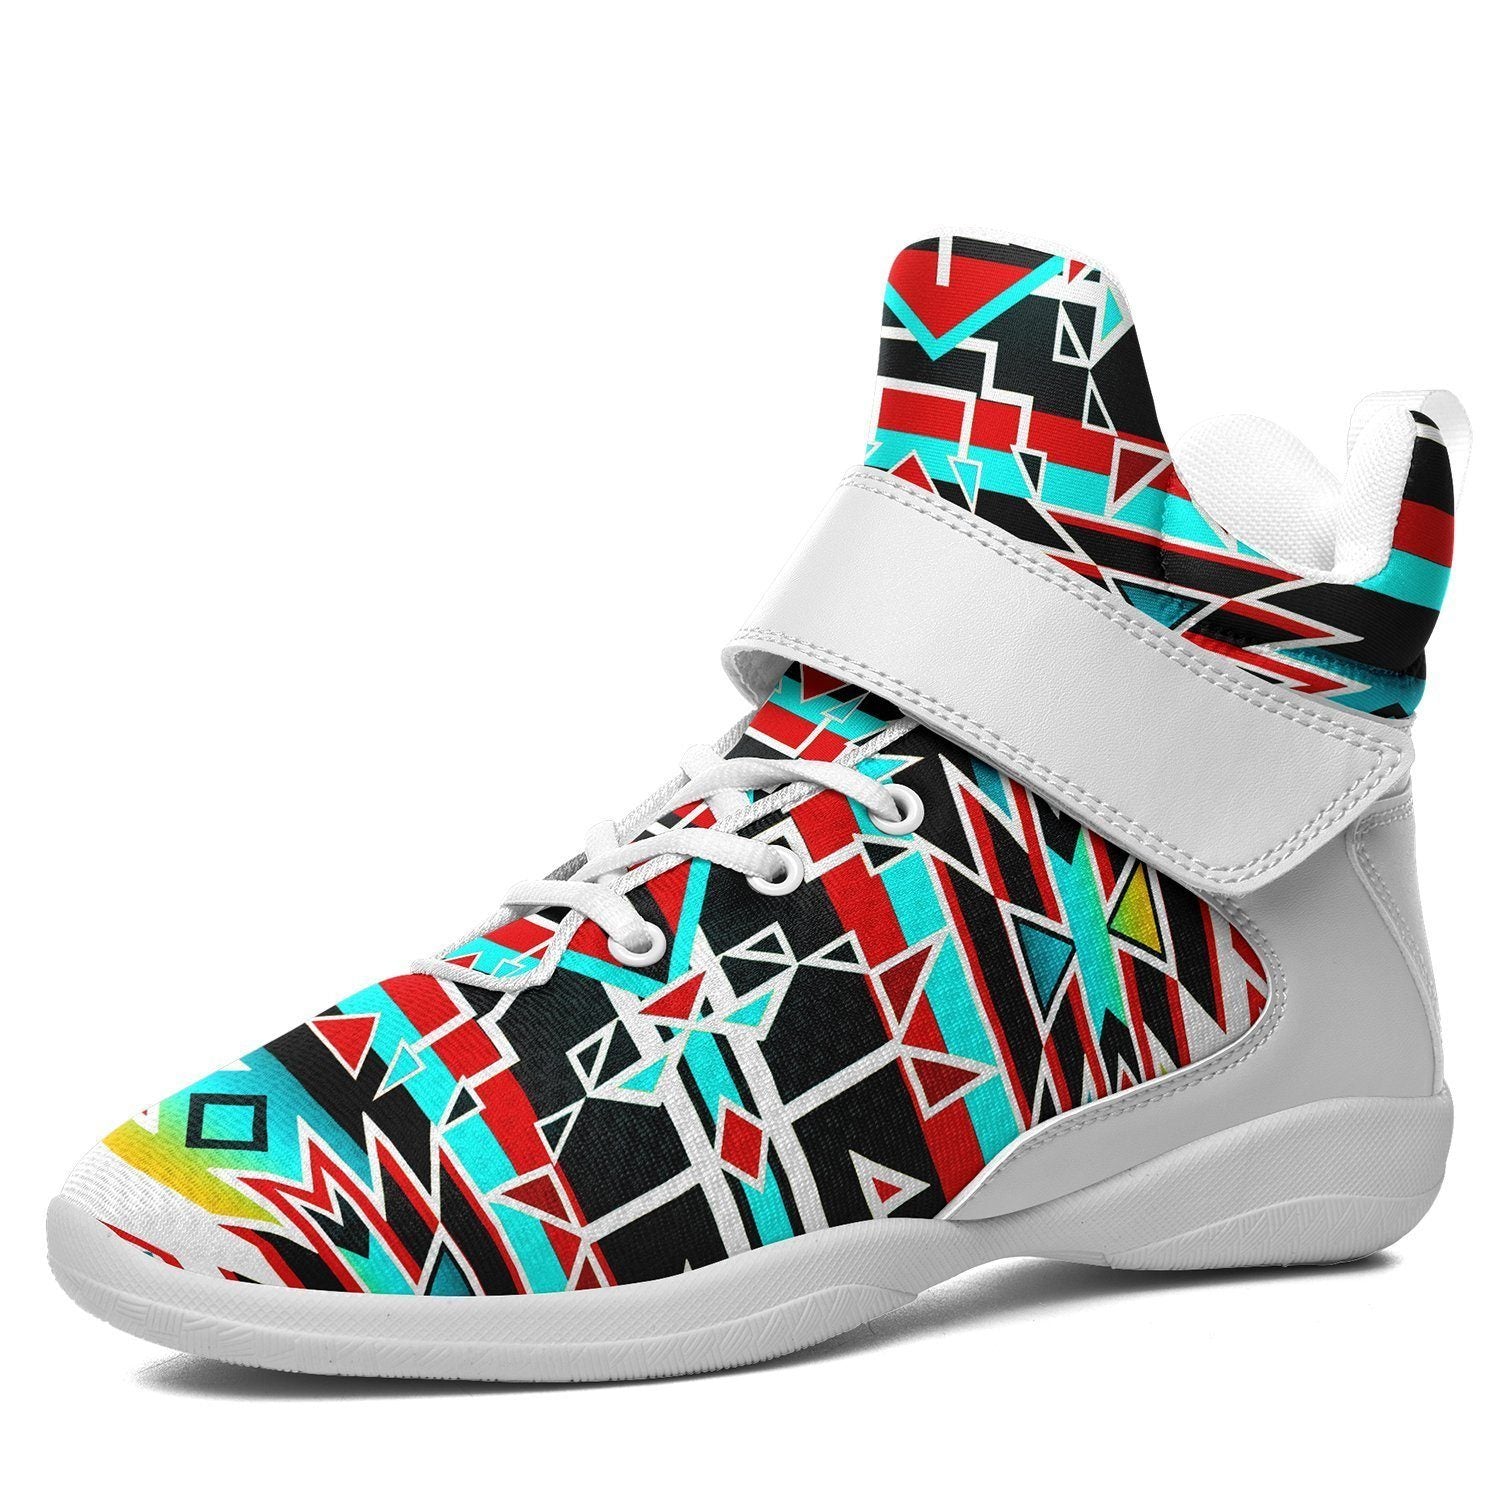 Force of Nature Windstorm Ipottaa Basketball / Sport High Top Shoes - White Sole 49 Dzine US Men 7 / EUR 40 White Sole with White Strap 